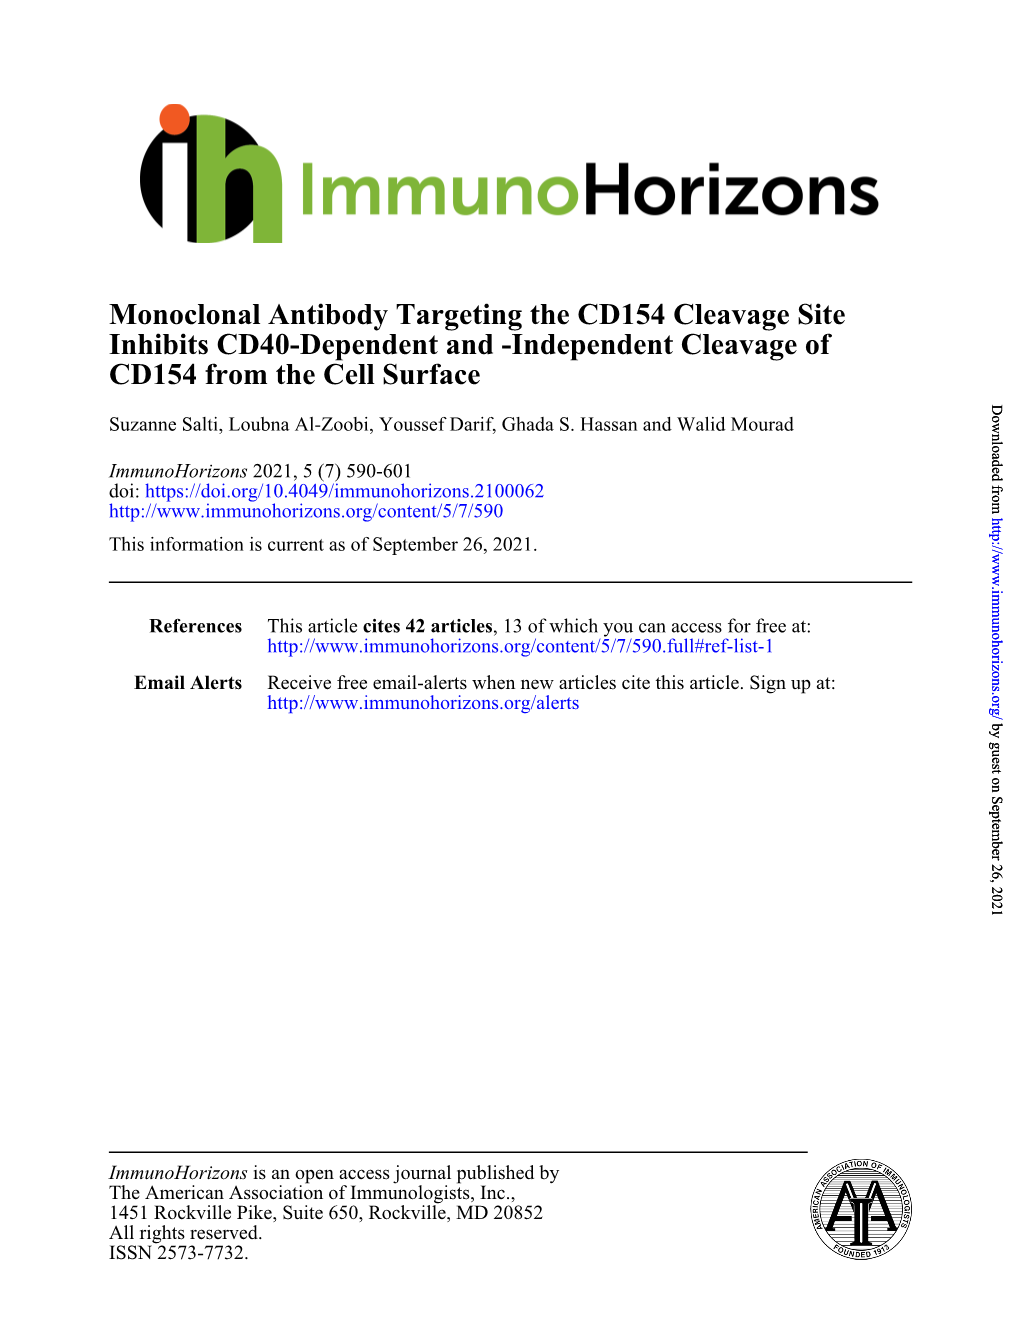 CD154 from the Cell Surface Inhibits CD40